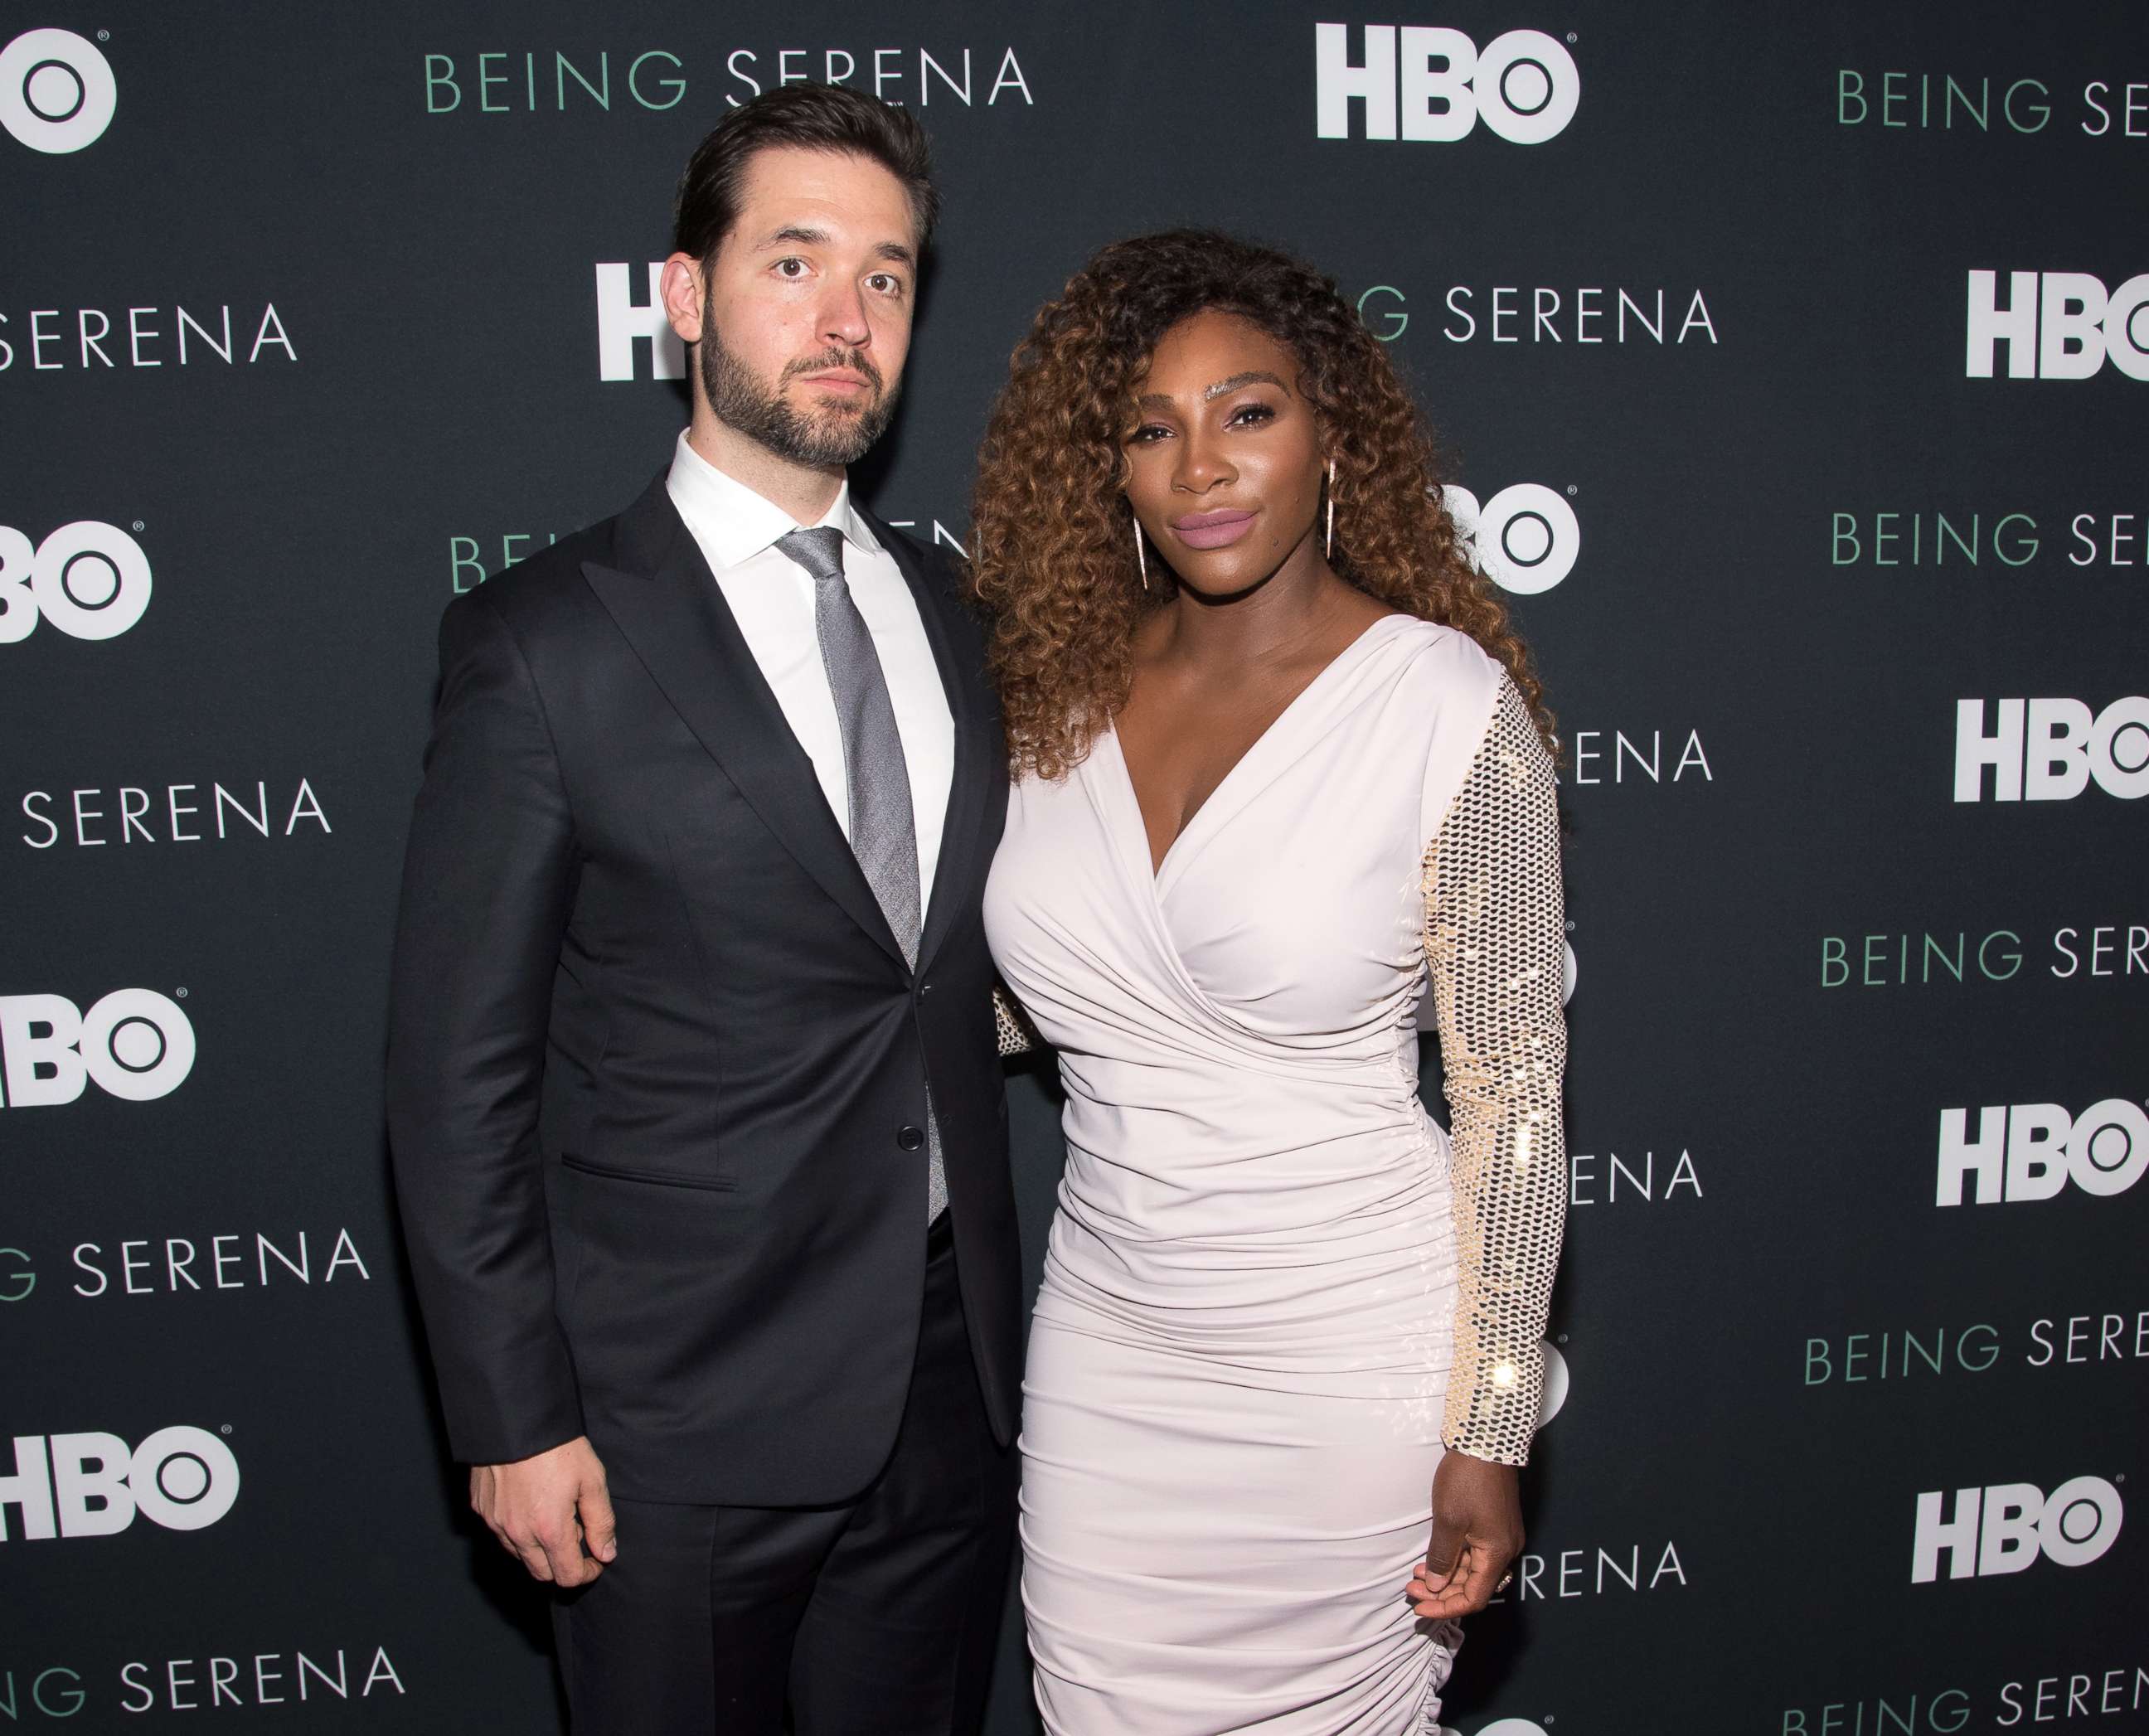 PHOTO: Serena Williams and husband Alexis Ohanian attend the "Being Serena" New York Premiere at Time Warner Center, April 25, 2018, in New York City.